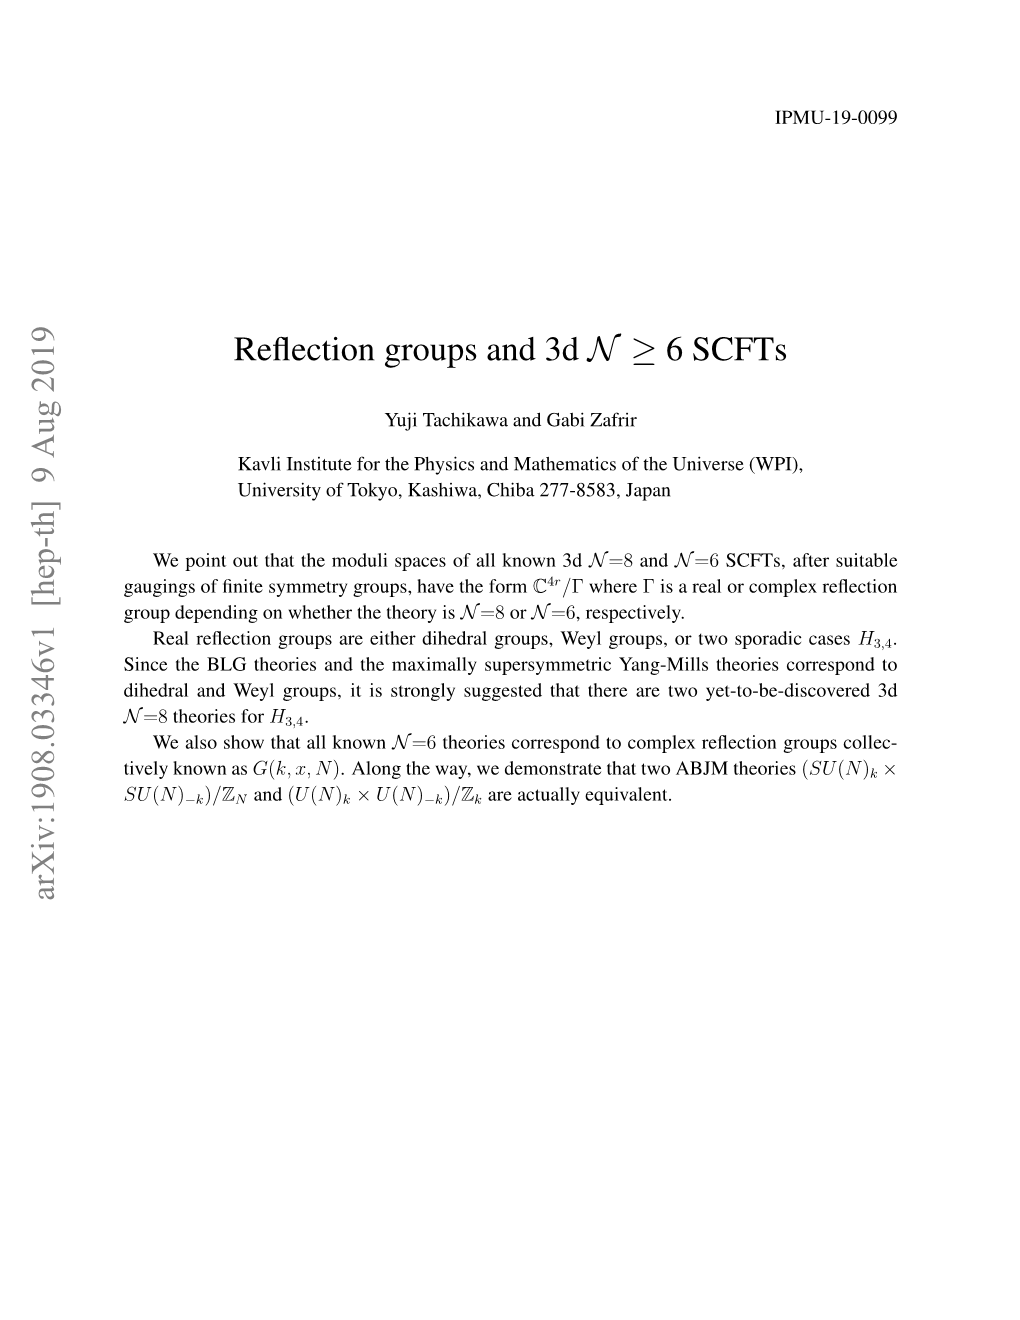 Reflection Groups and 3D $\Mathcal {N}\Ge $6 Scfts